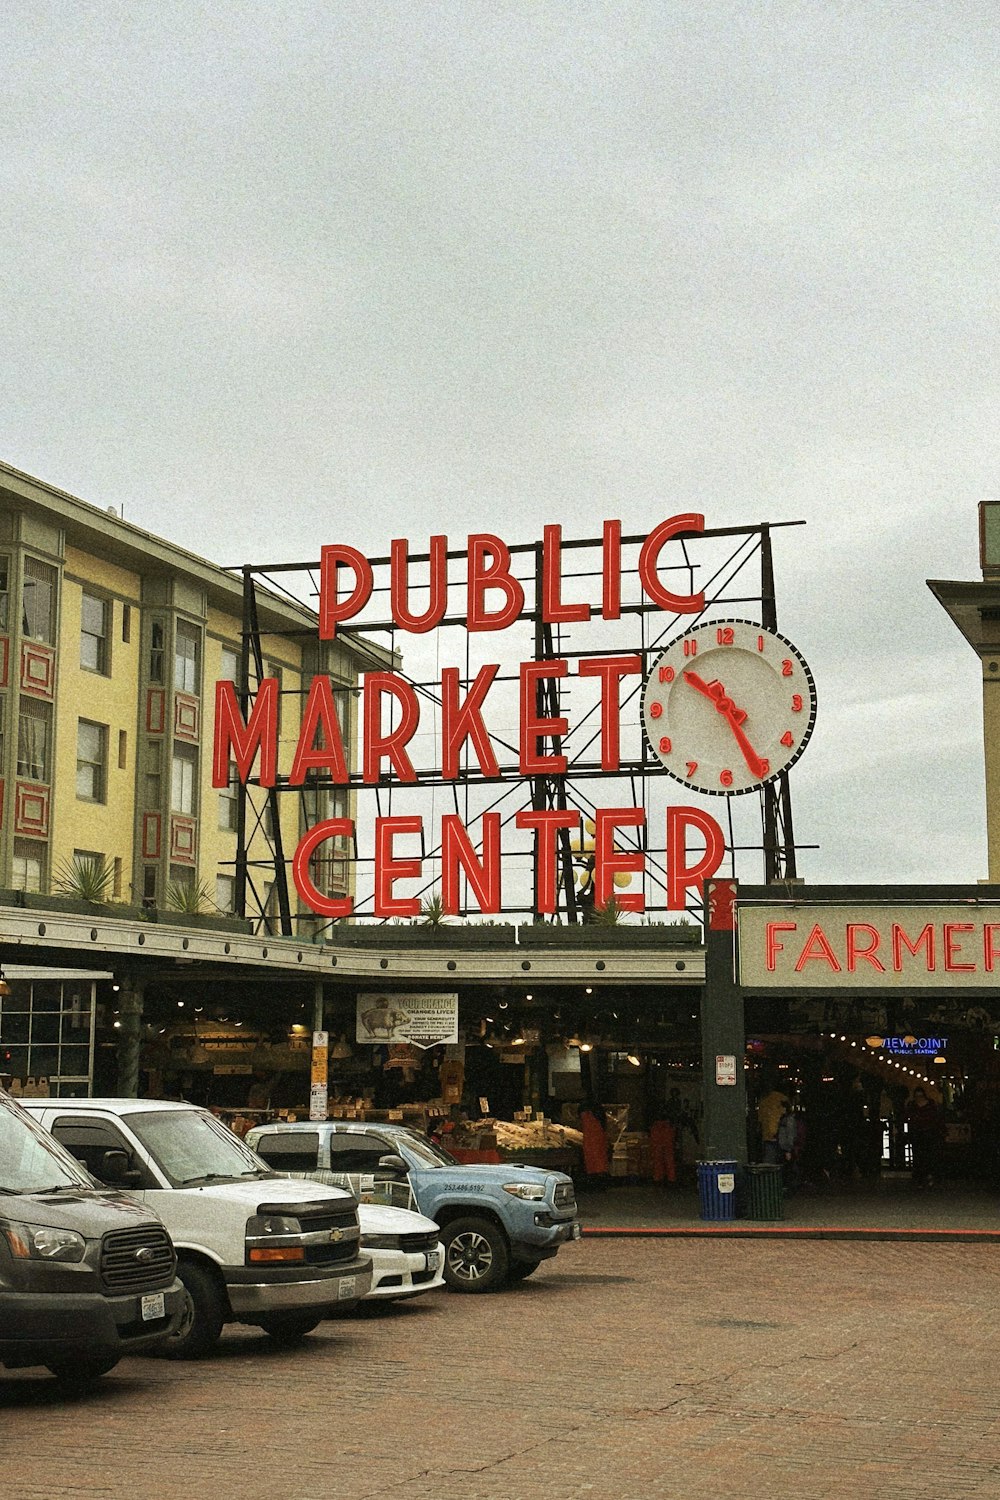 a public market center with cars parked in front of it